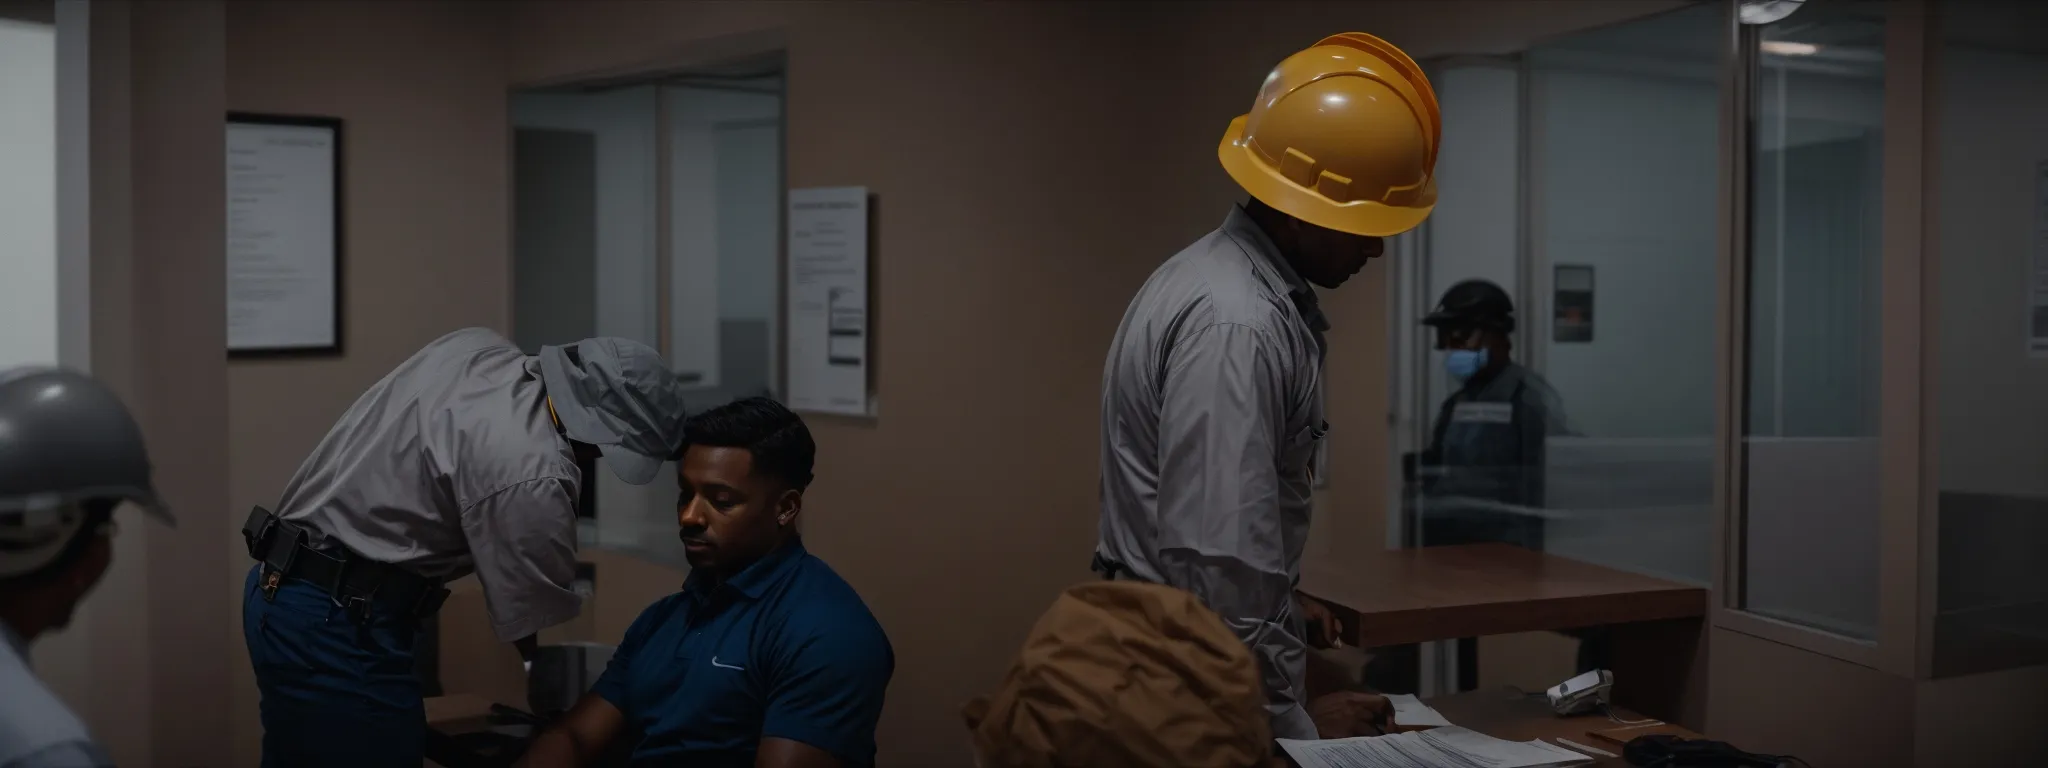 a construction worker in jacksonville consulting with an attorney in an office, with visible safety gear such as a helmet placed on the table.